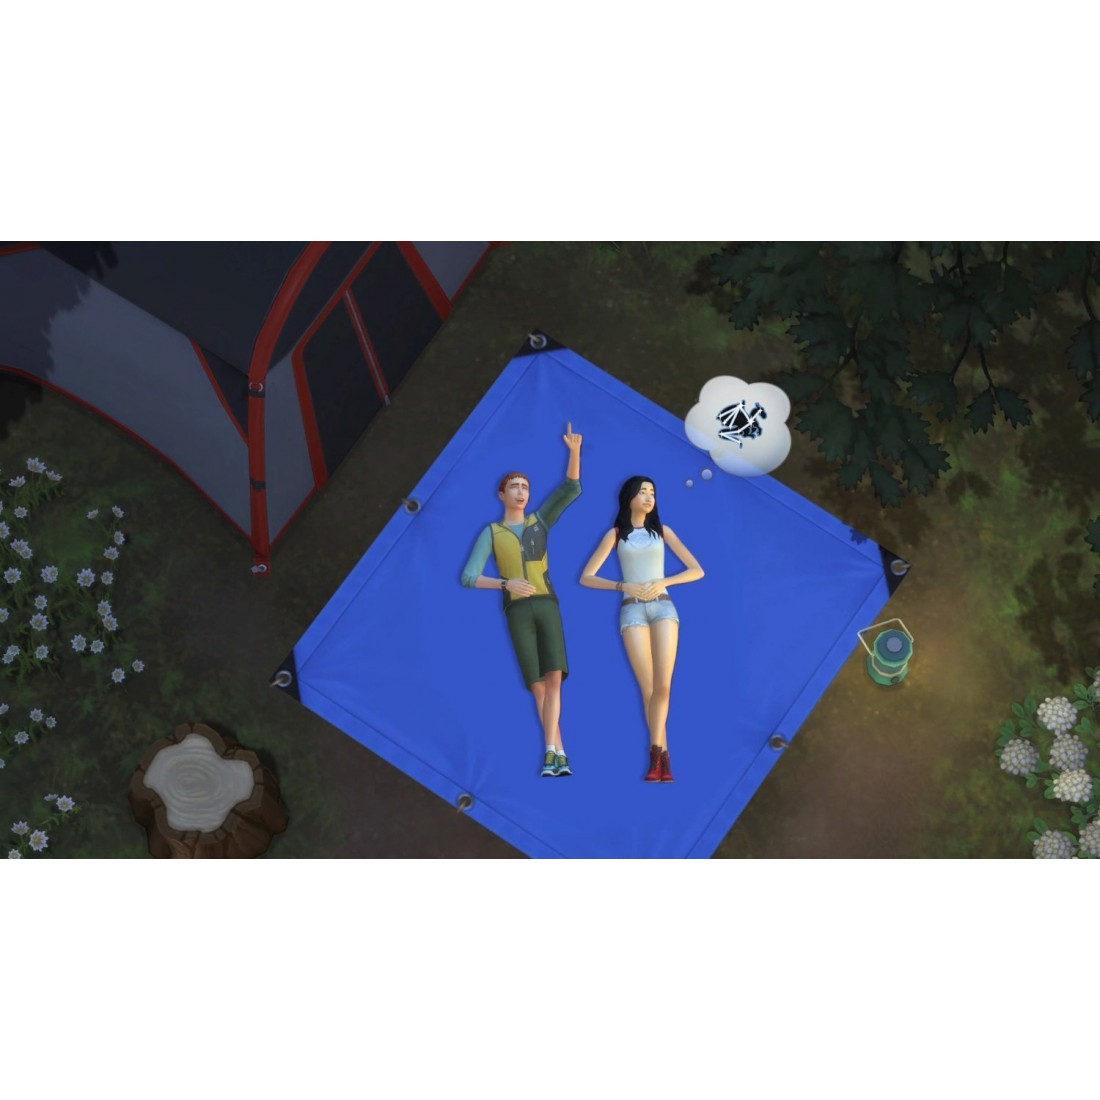 the sims 4 pc